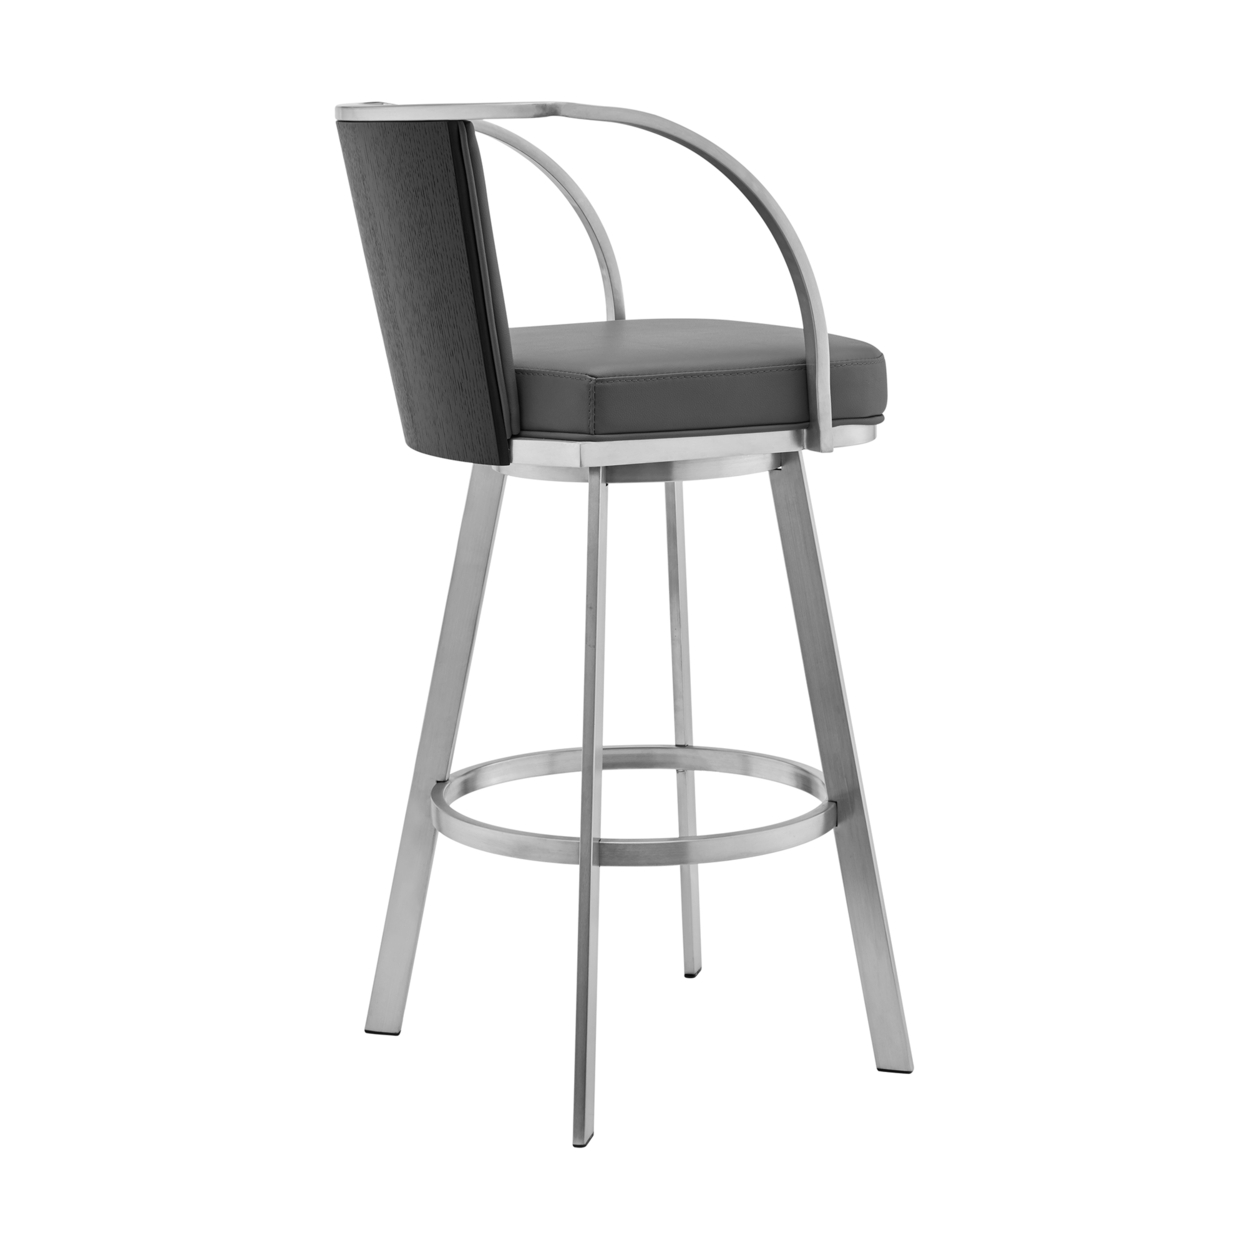 Ovn 26 Inch Swivel Counter Stool, Stainless Steel Frame, Gray Faux Leather- Saltoro Sherpi